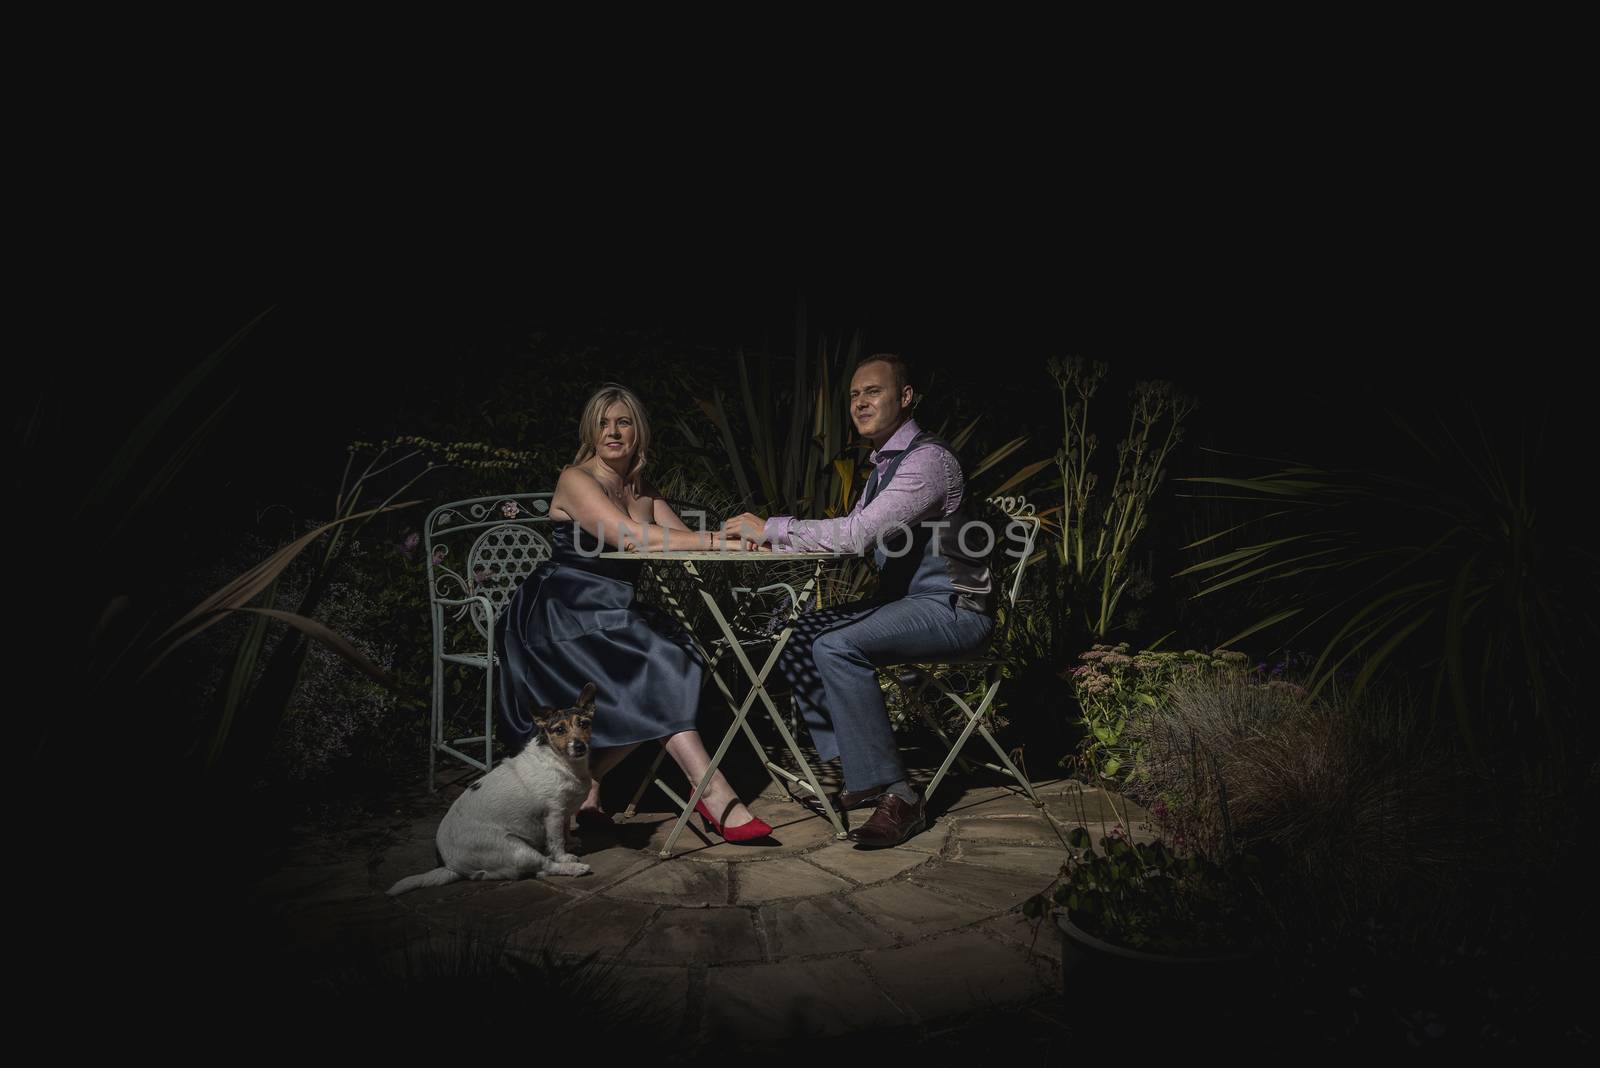 Quorn, UK - Aug 2019: Couple holding hands on a garden bench at night, dog in forground